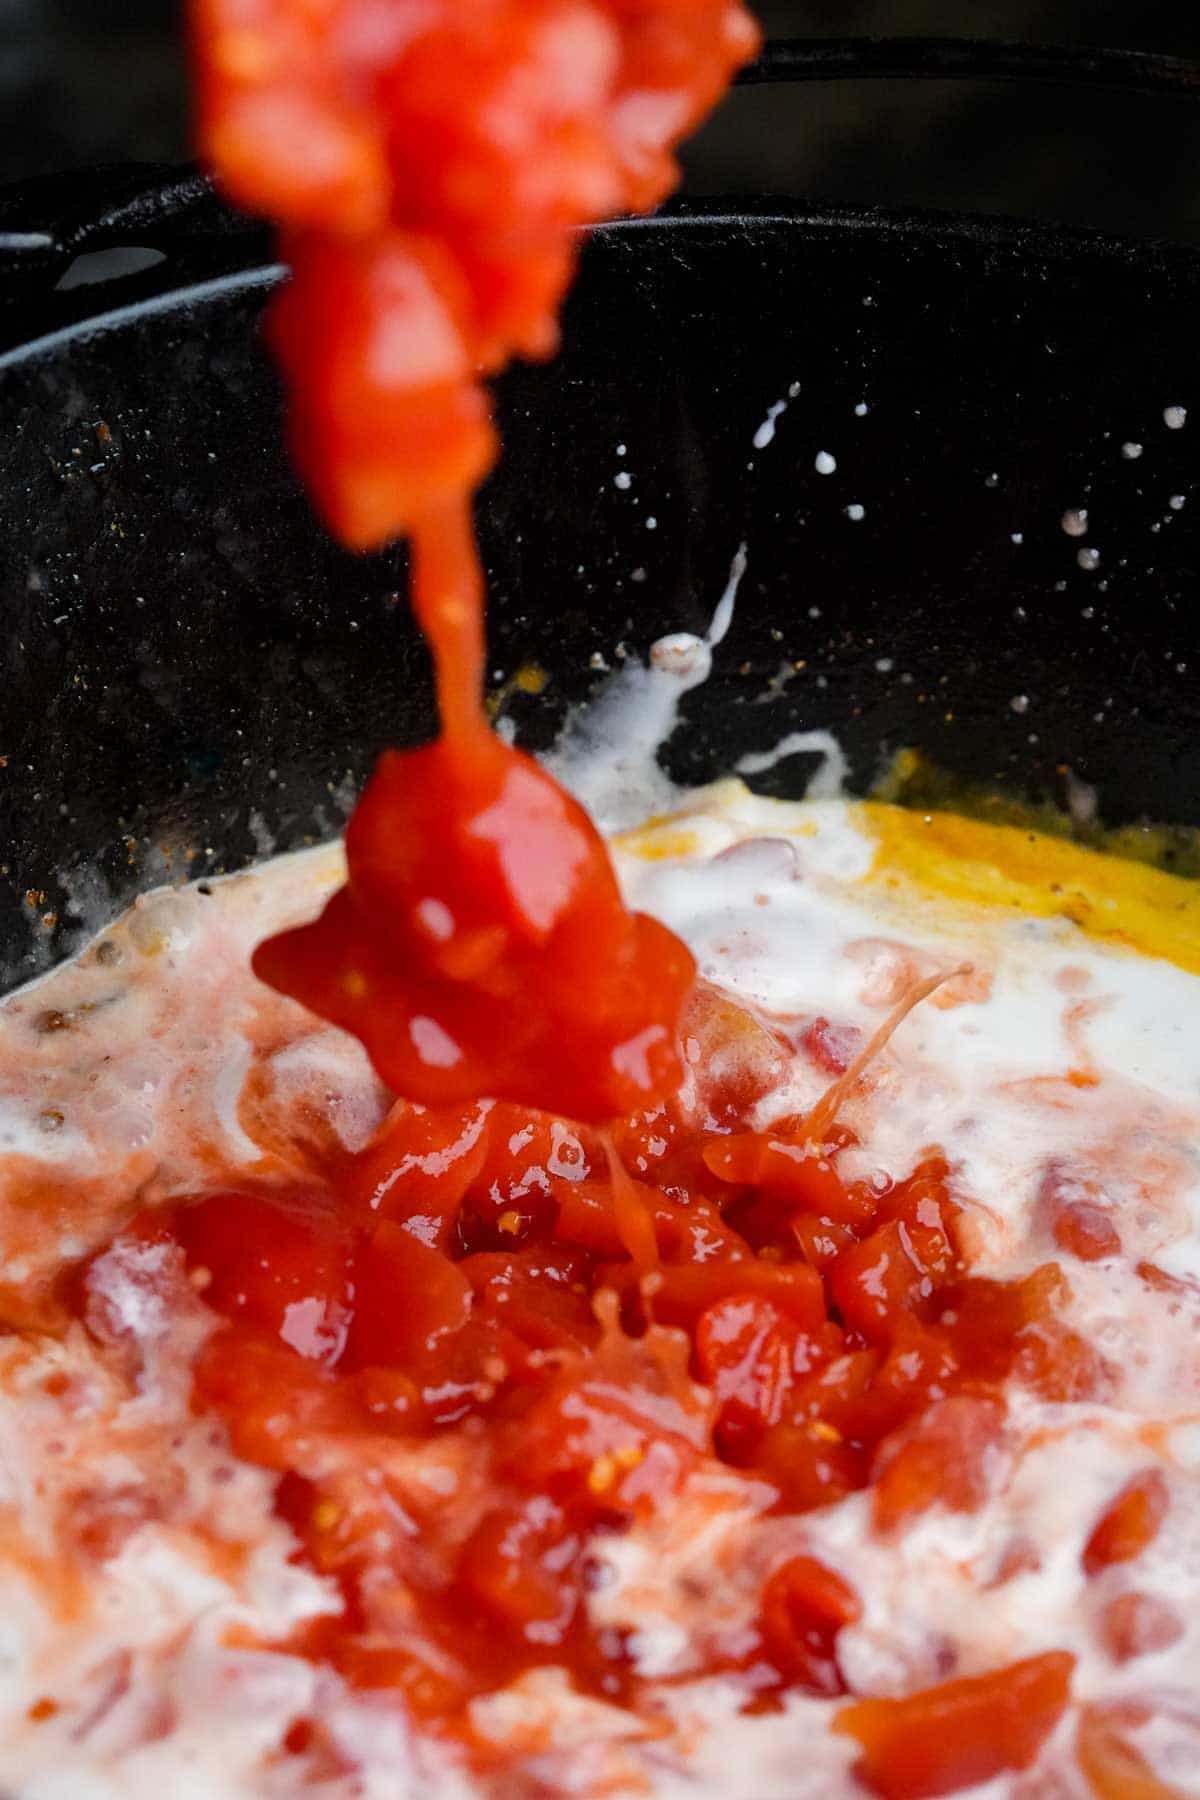 Diced tomato is being poured into a pan with coconut milk and aromatics.